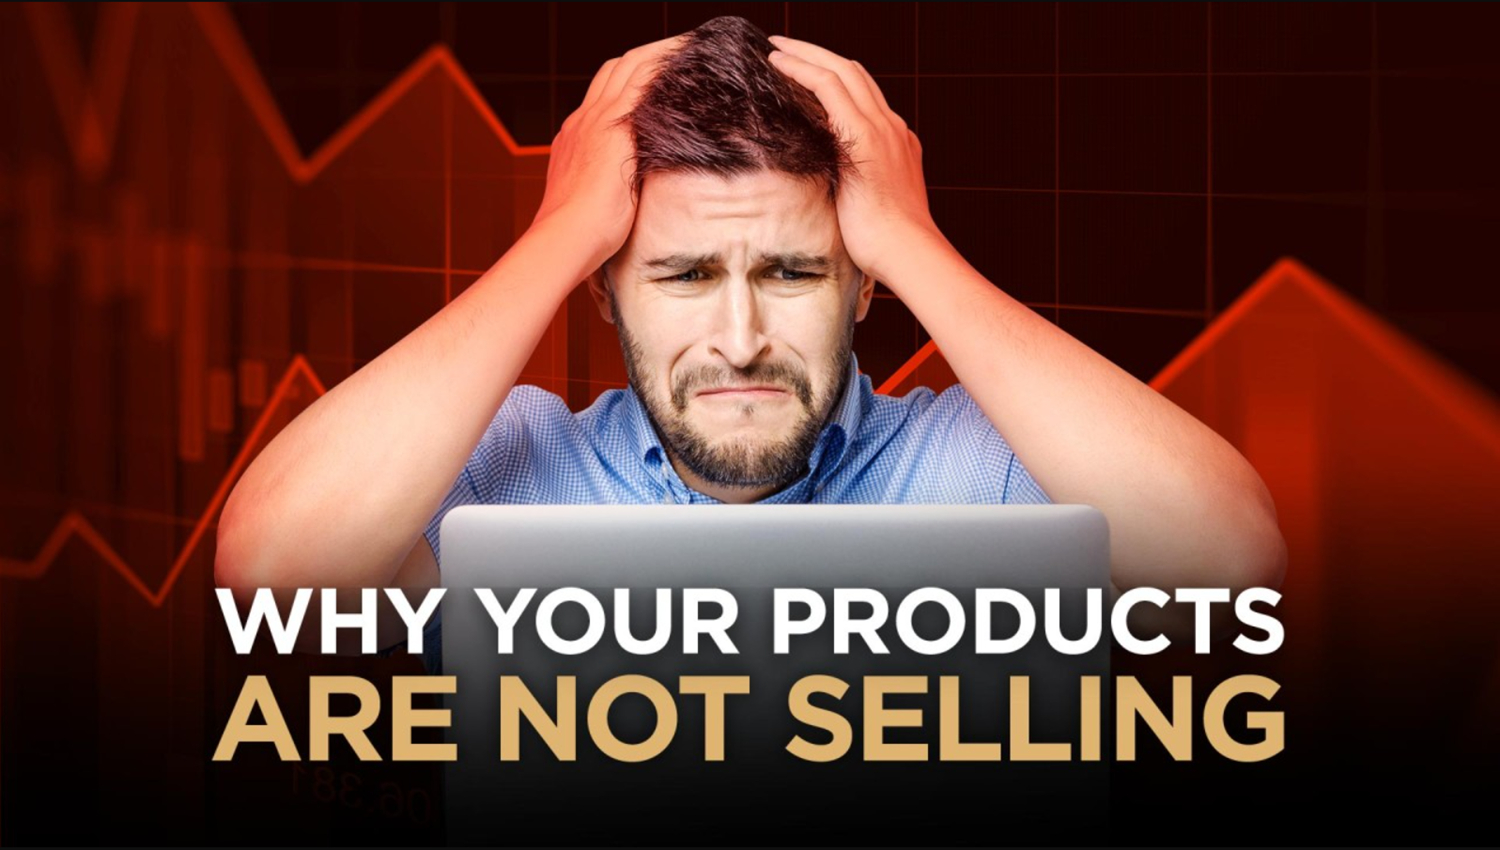 why the products are not selling